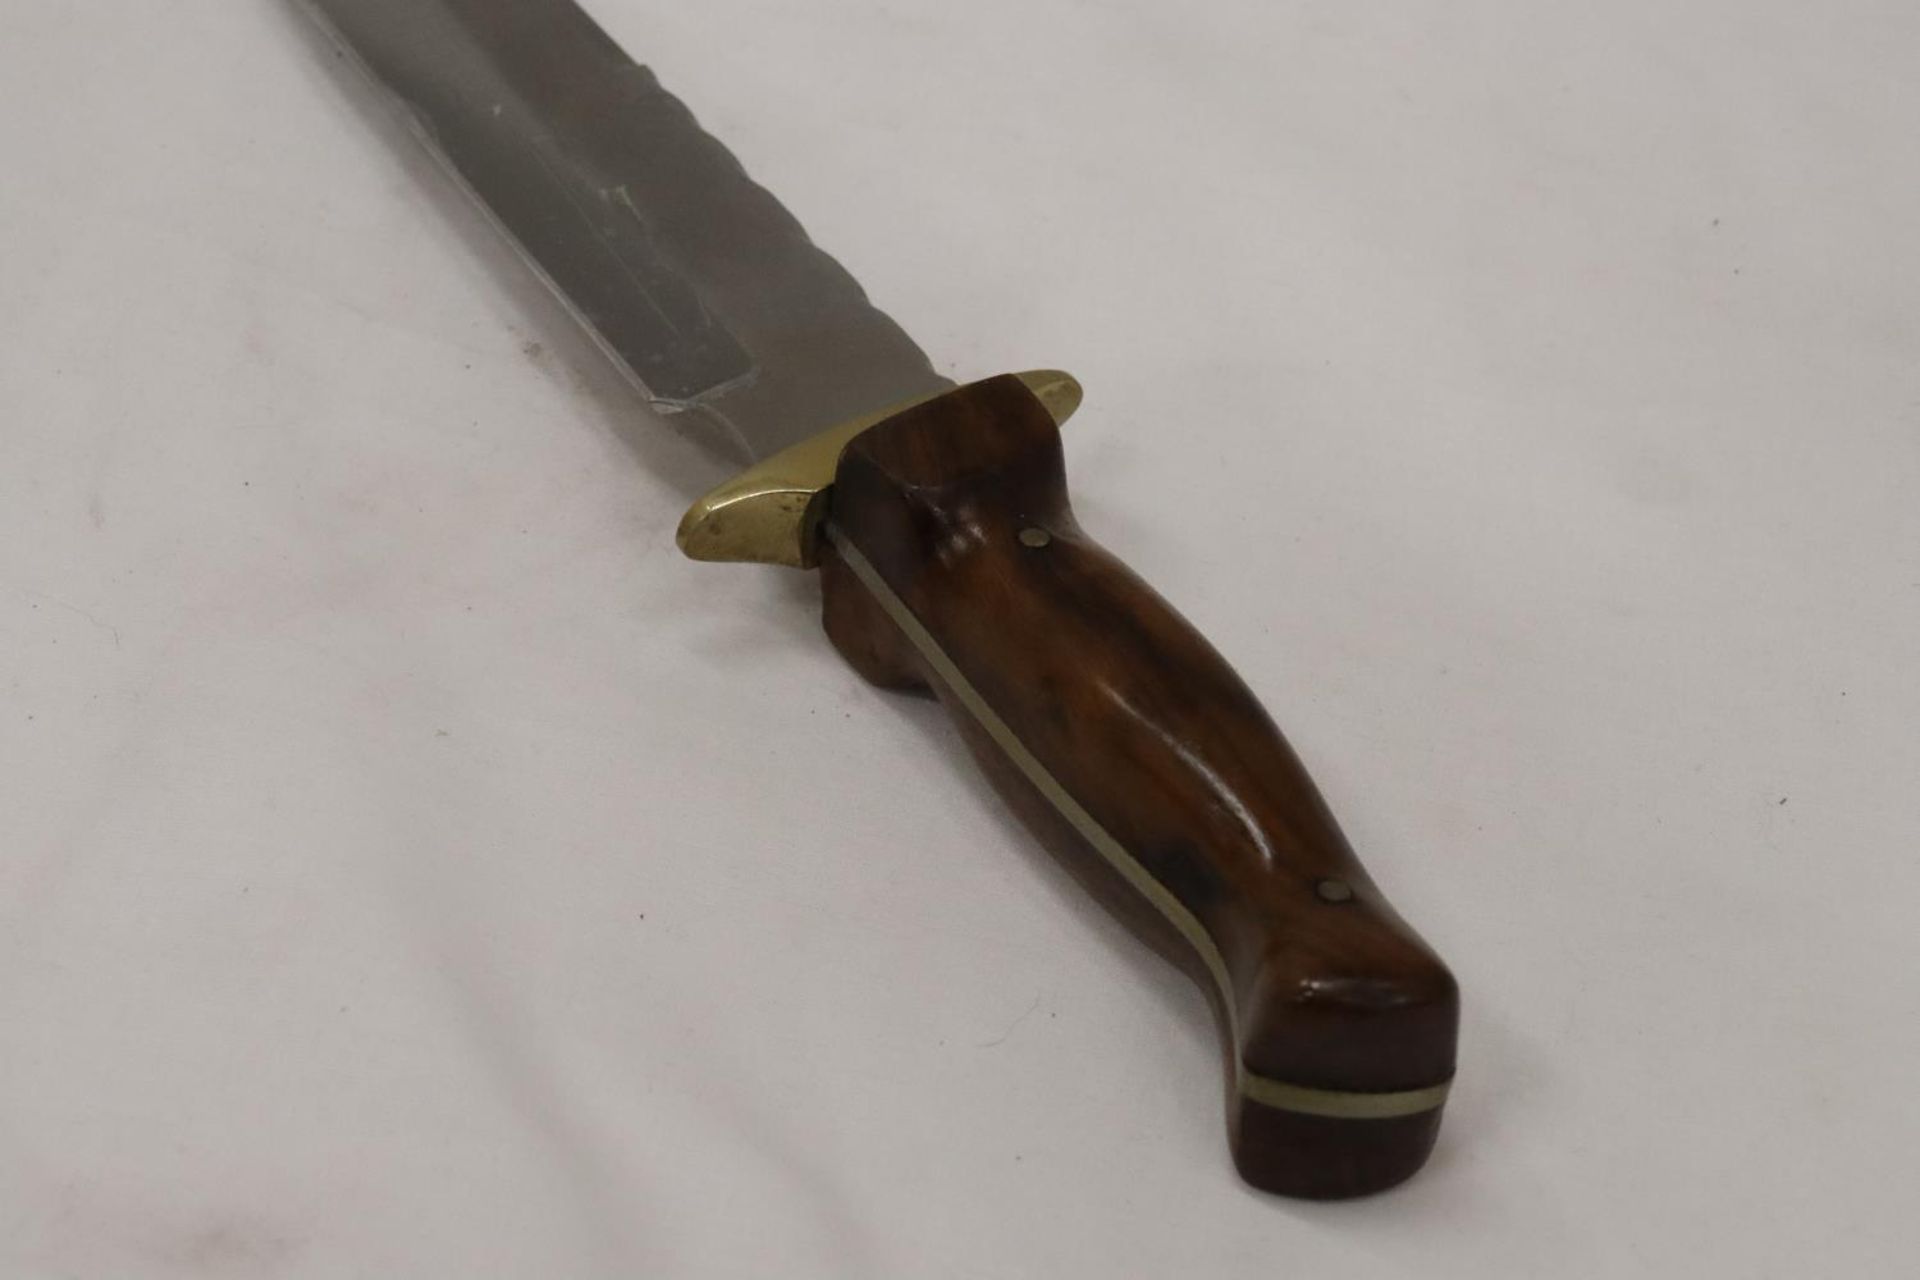 A HANDMADE DAGGER WITH WOODEN HANDLE - Image 4 of 4